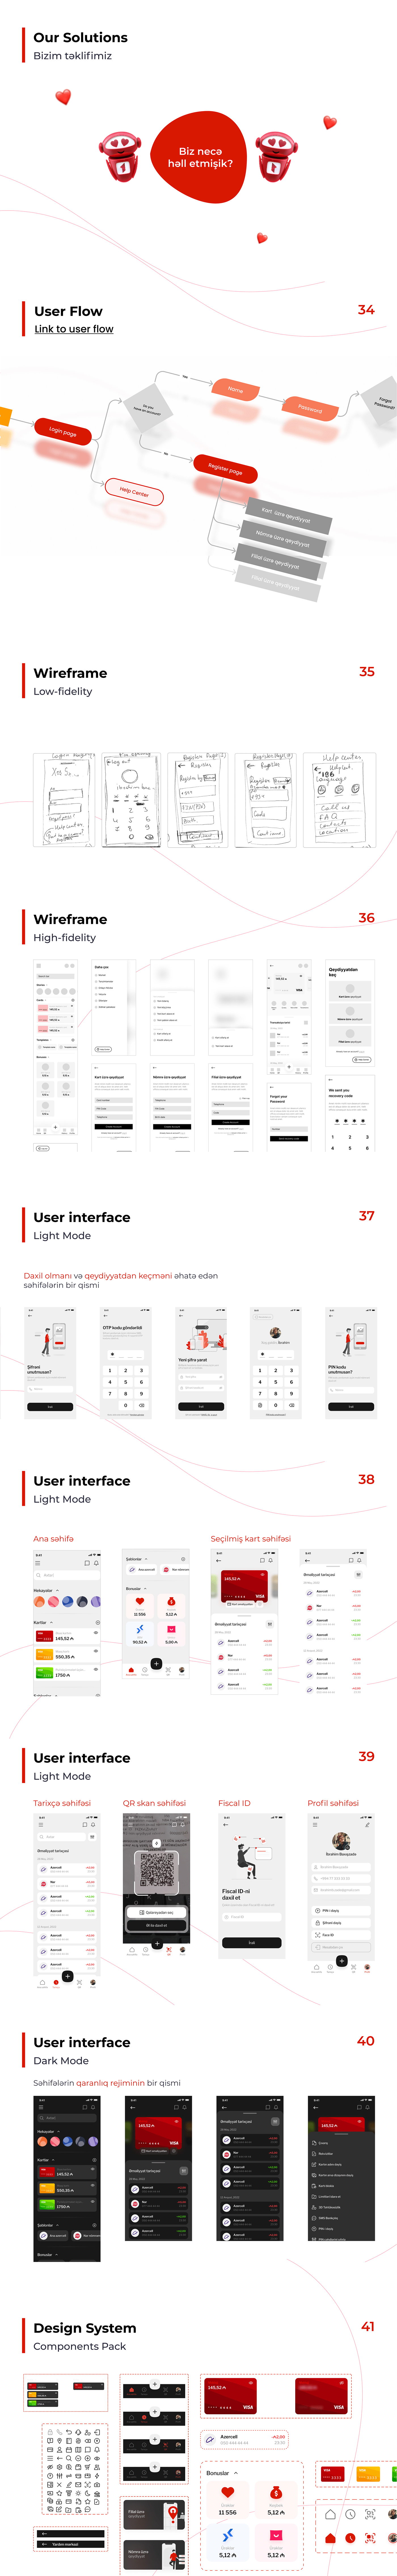 birbank Case Study Figma Mobile app Prototyping usability testing user interface user persona User research UX design